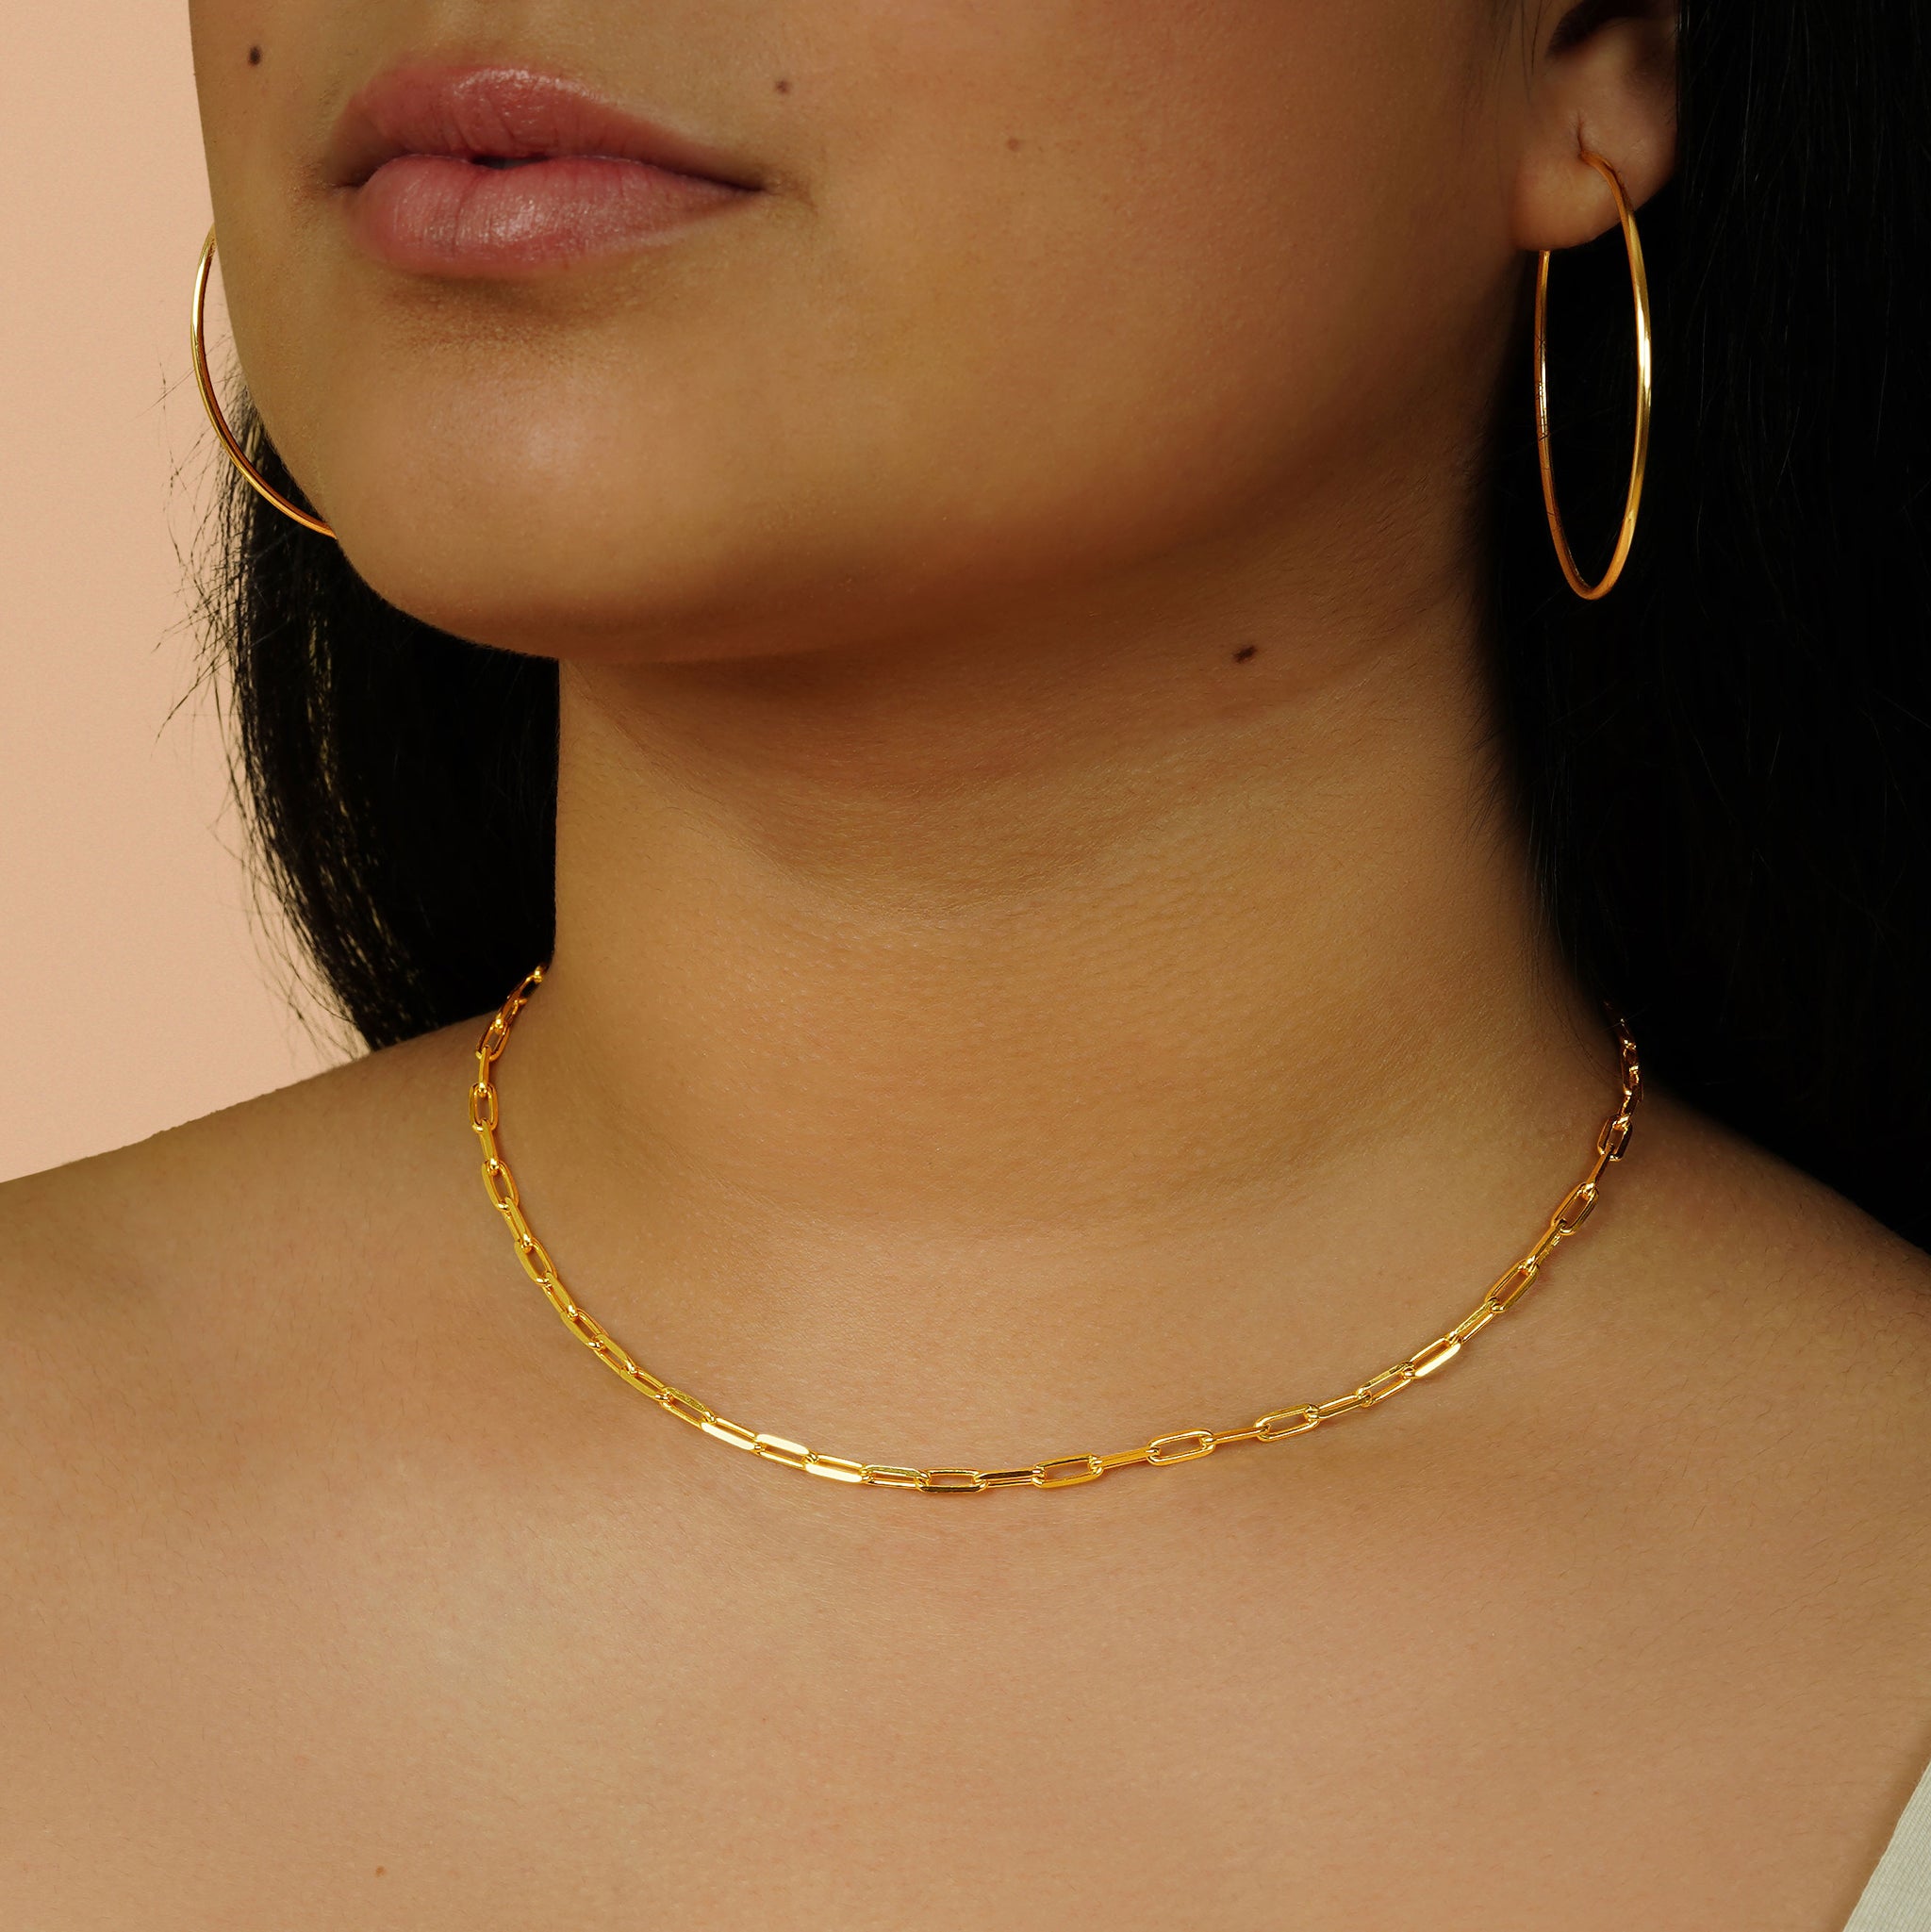 Mini Paperclip Chain Necklace Adjustable 46cm/18' in 18k Gold Vermeil on  Sterling Silver | Jewellery by Monica Vinader